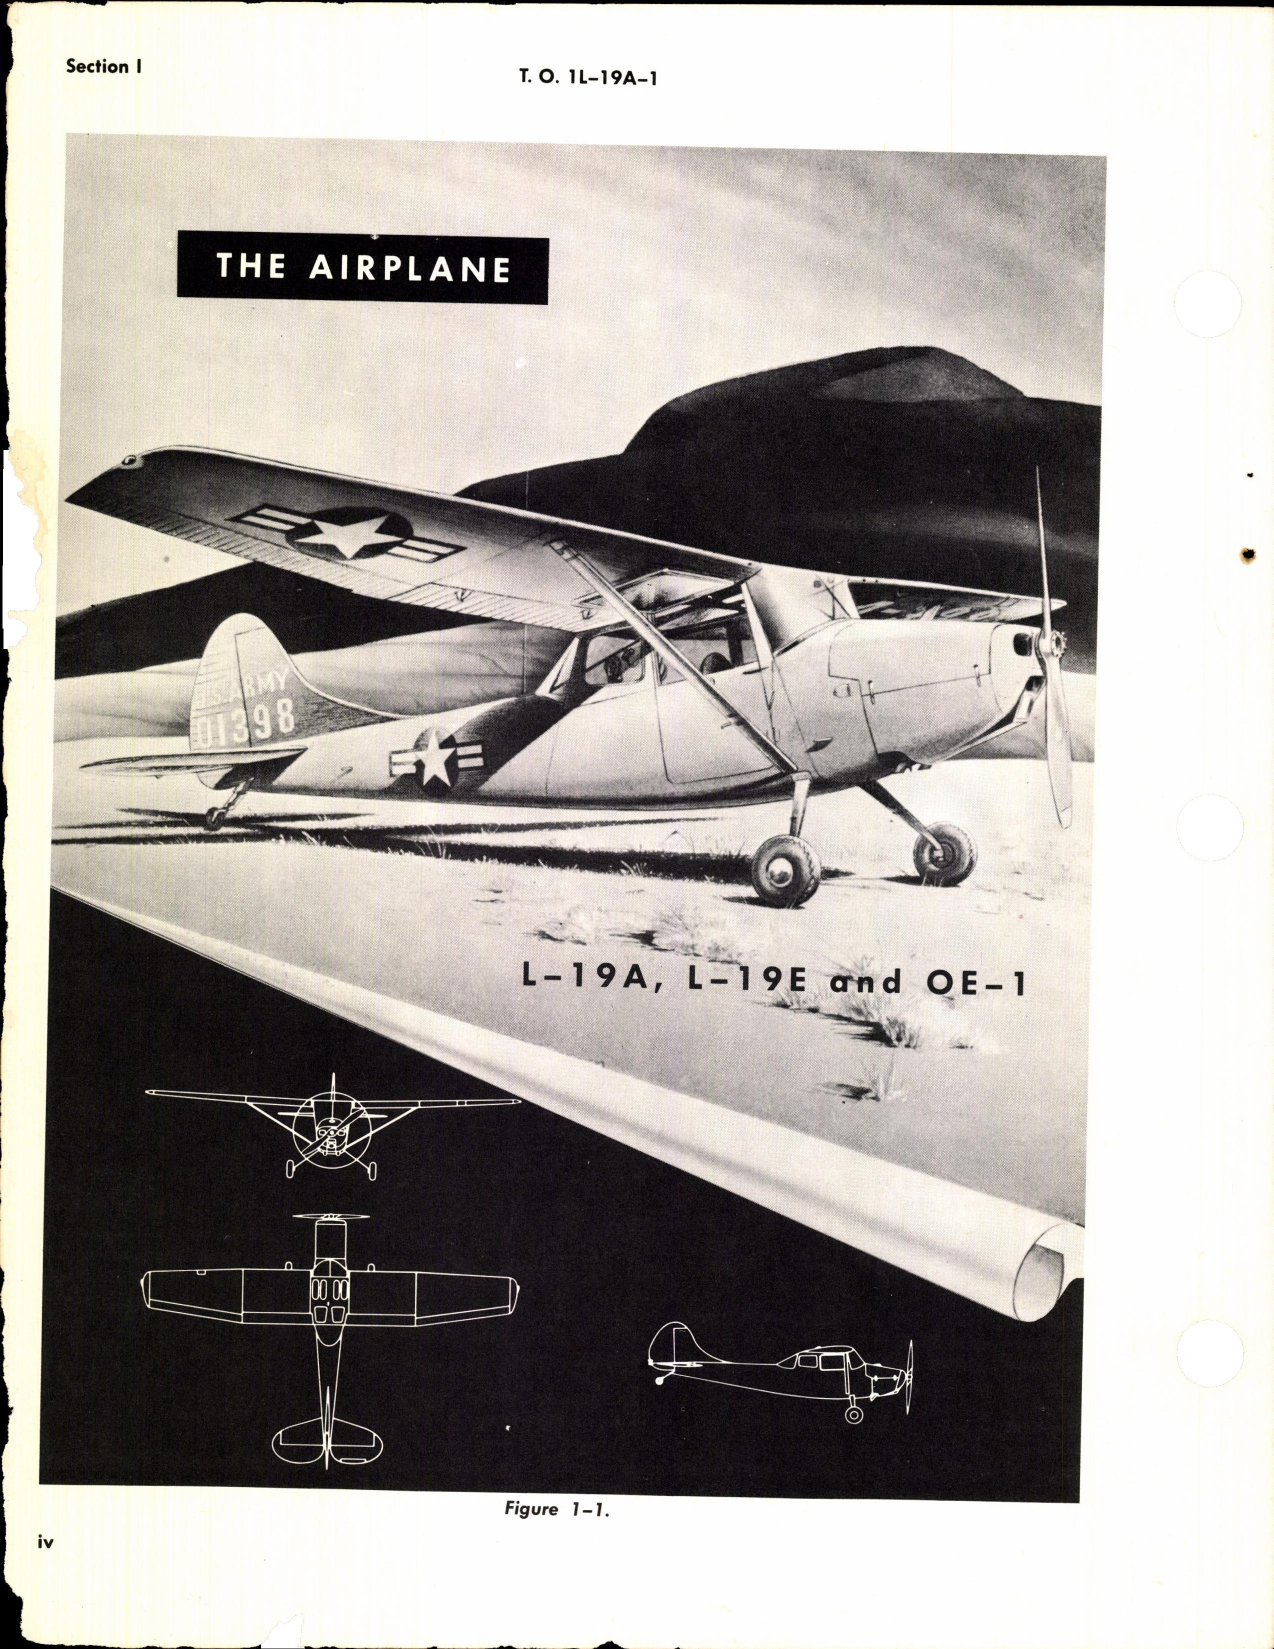 Sample page 6 from AirCorps Library document: Flight Handbook for L-19A, L-19E, and OE-1